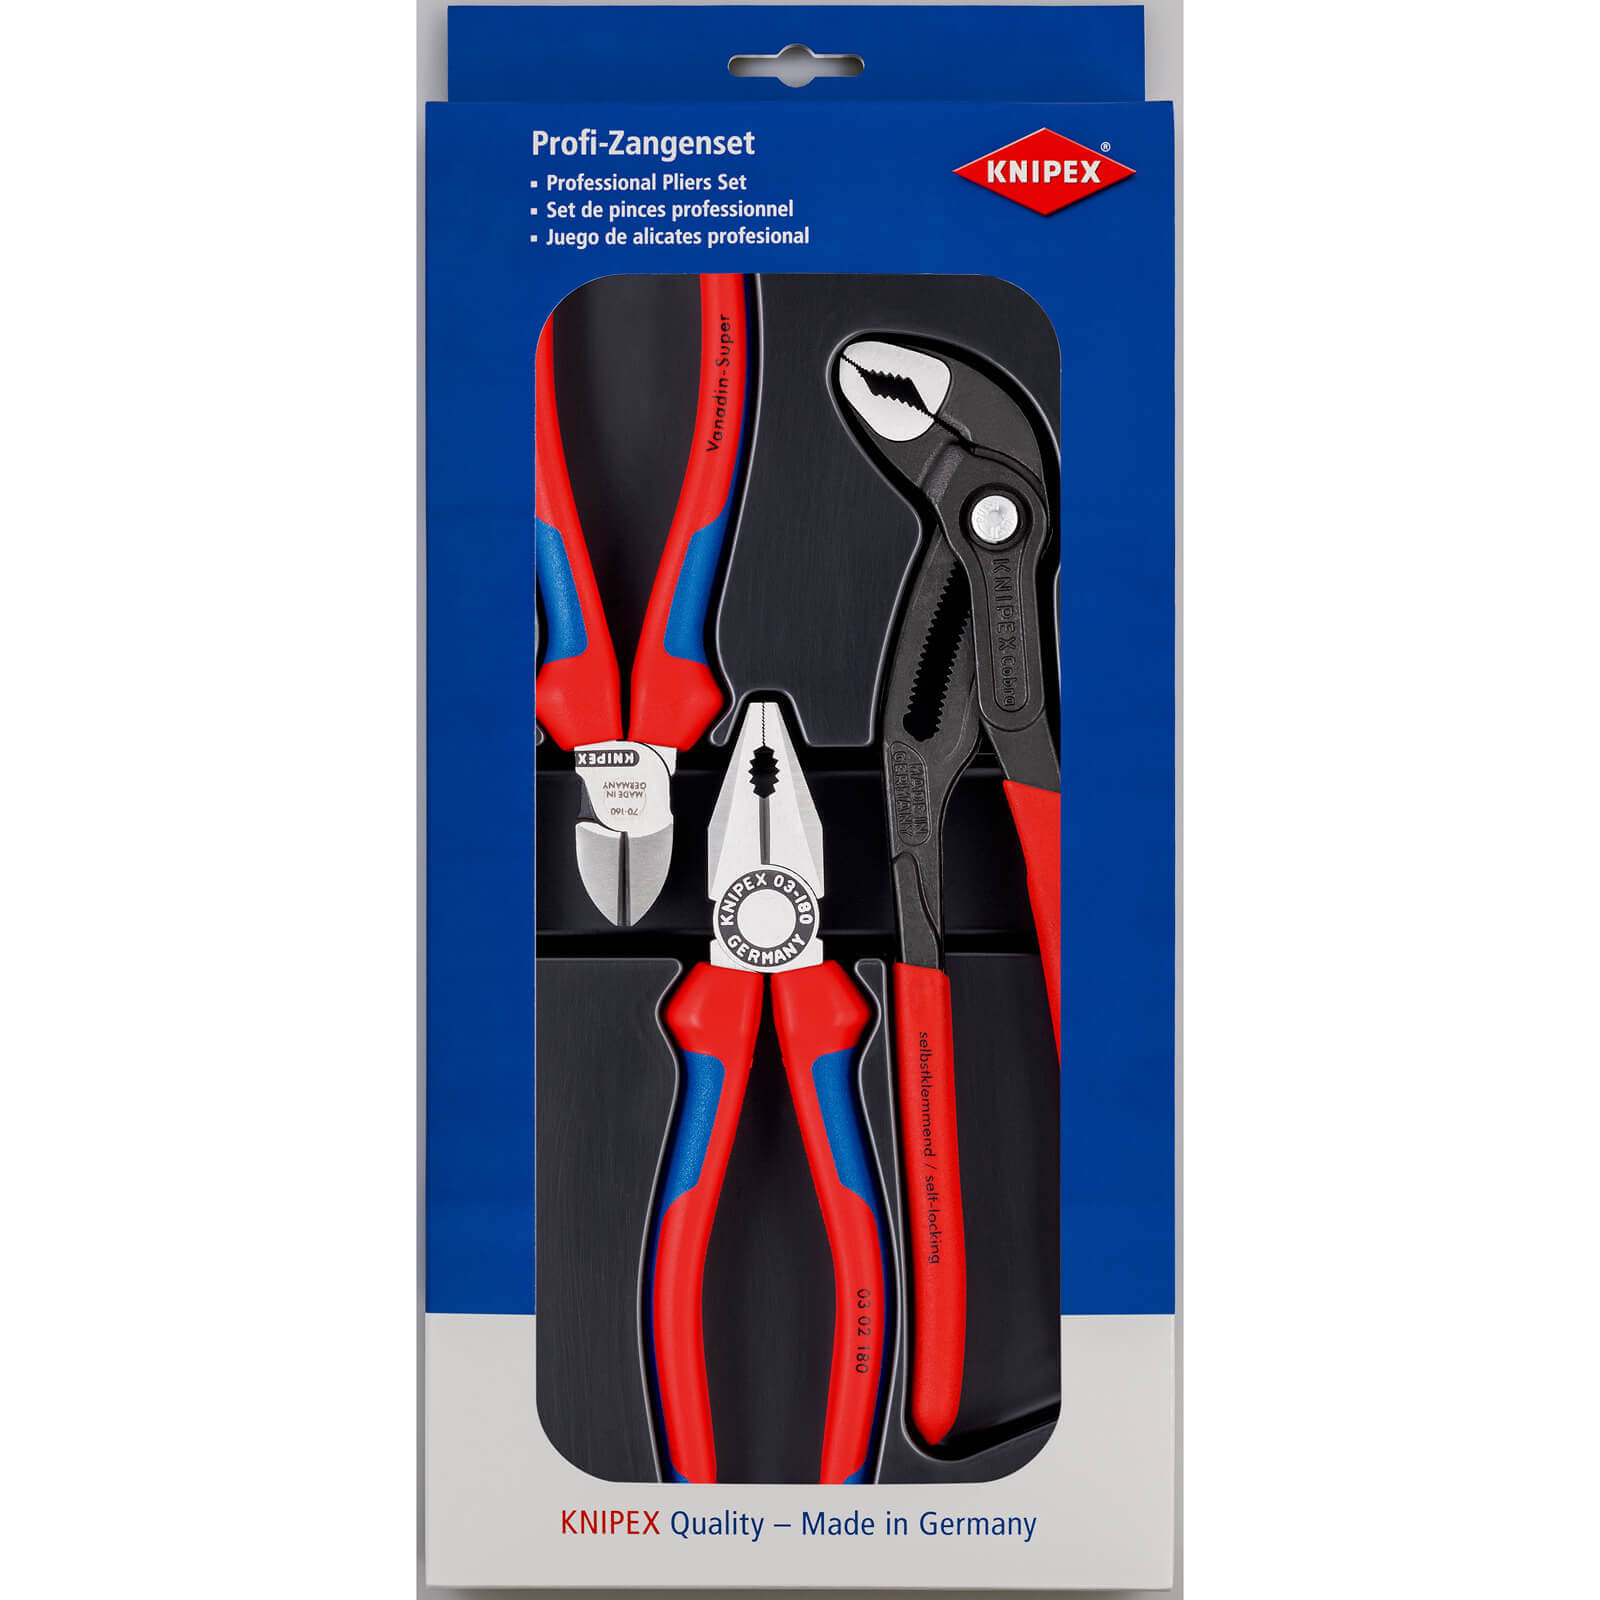 Photo of Knipex 3 Piece Professional Bestseller Pliers Set